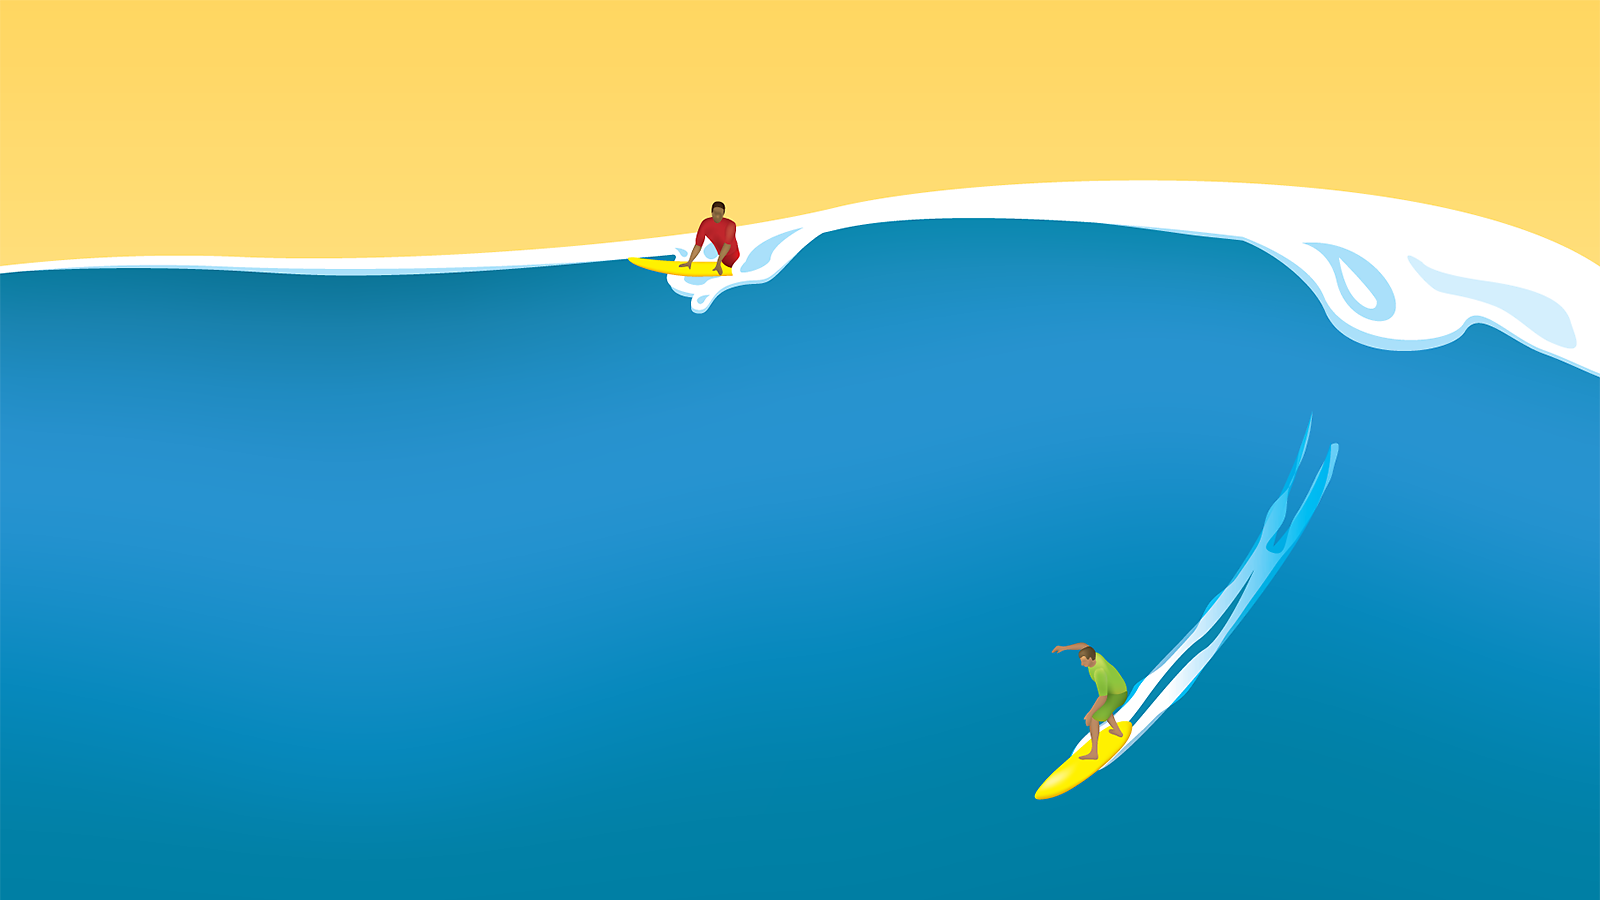 Illustration of surfers on a large wave